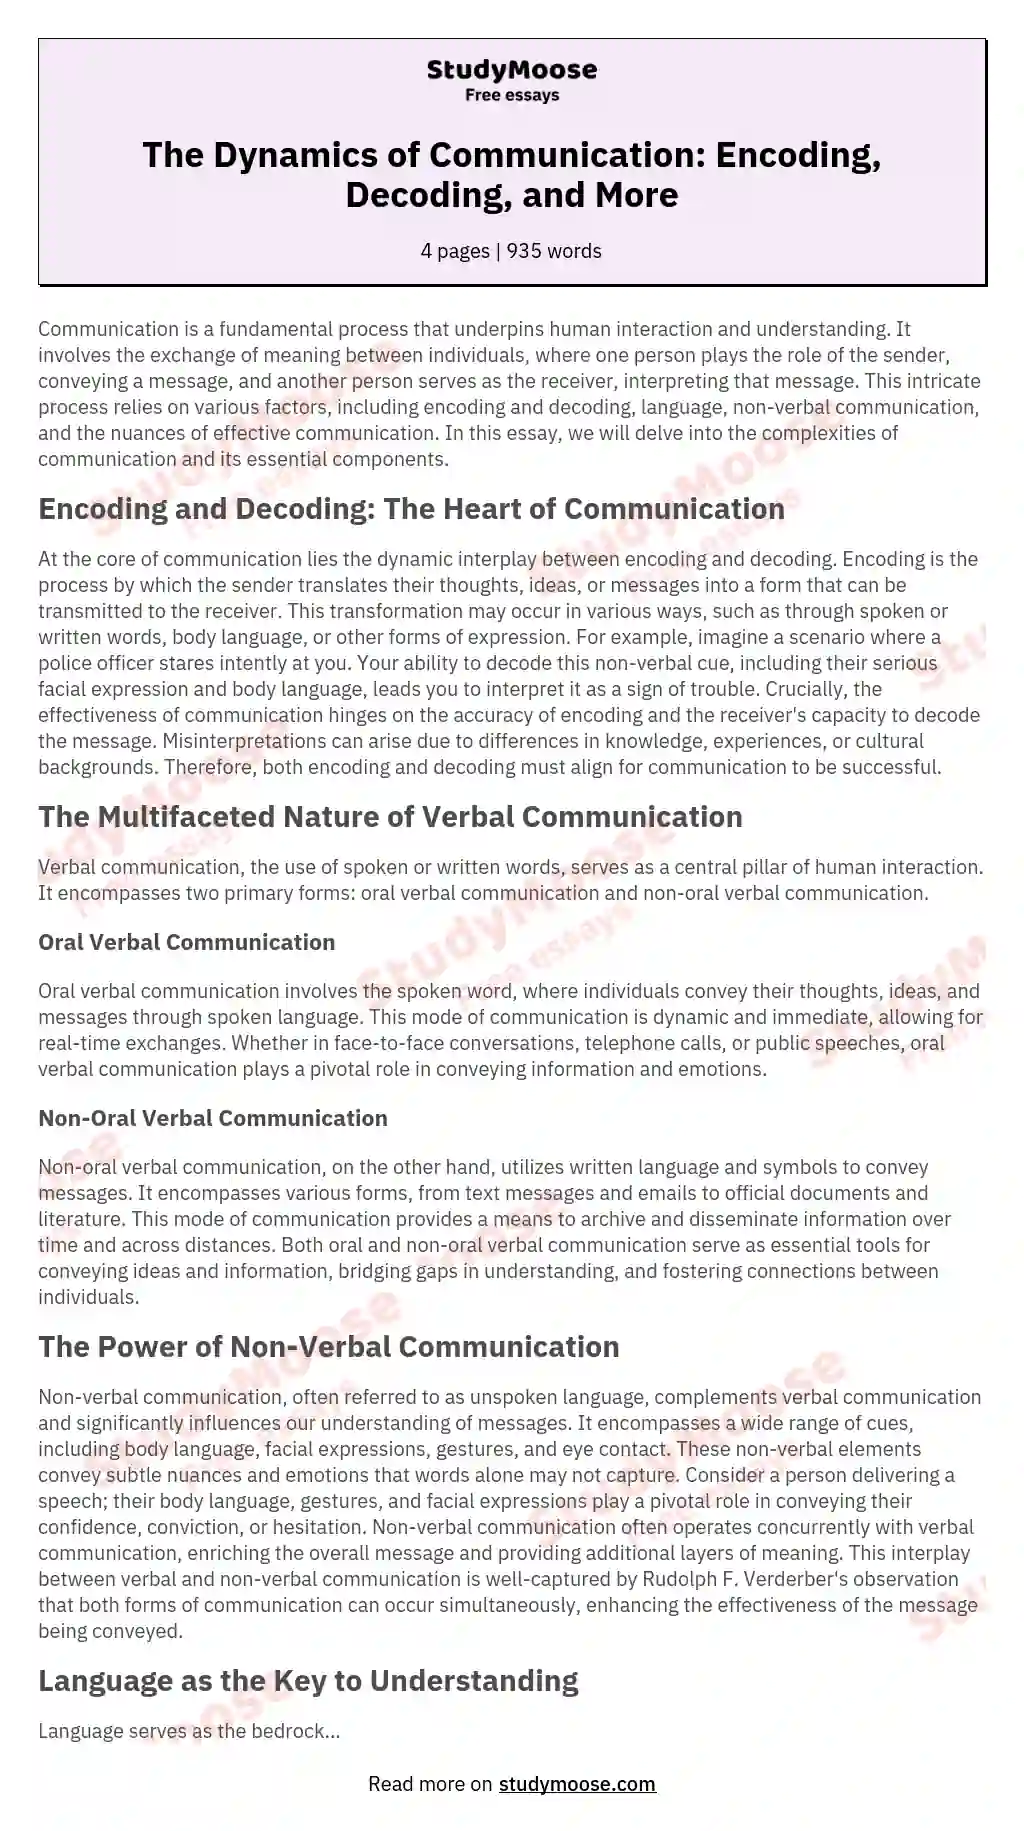 The Dynamics of Communication: Encoding, Decoding, and More